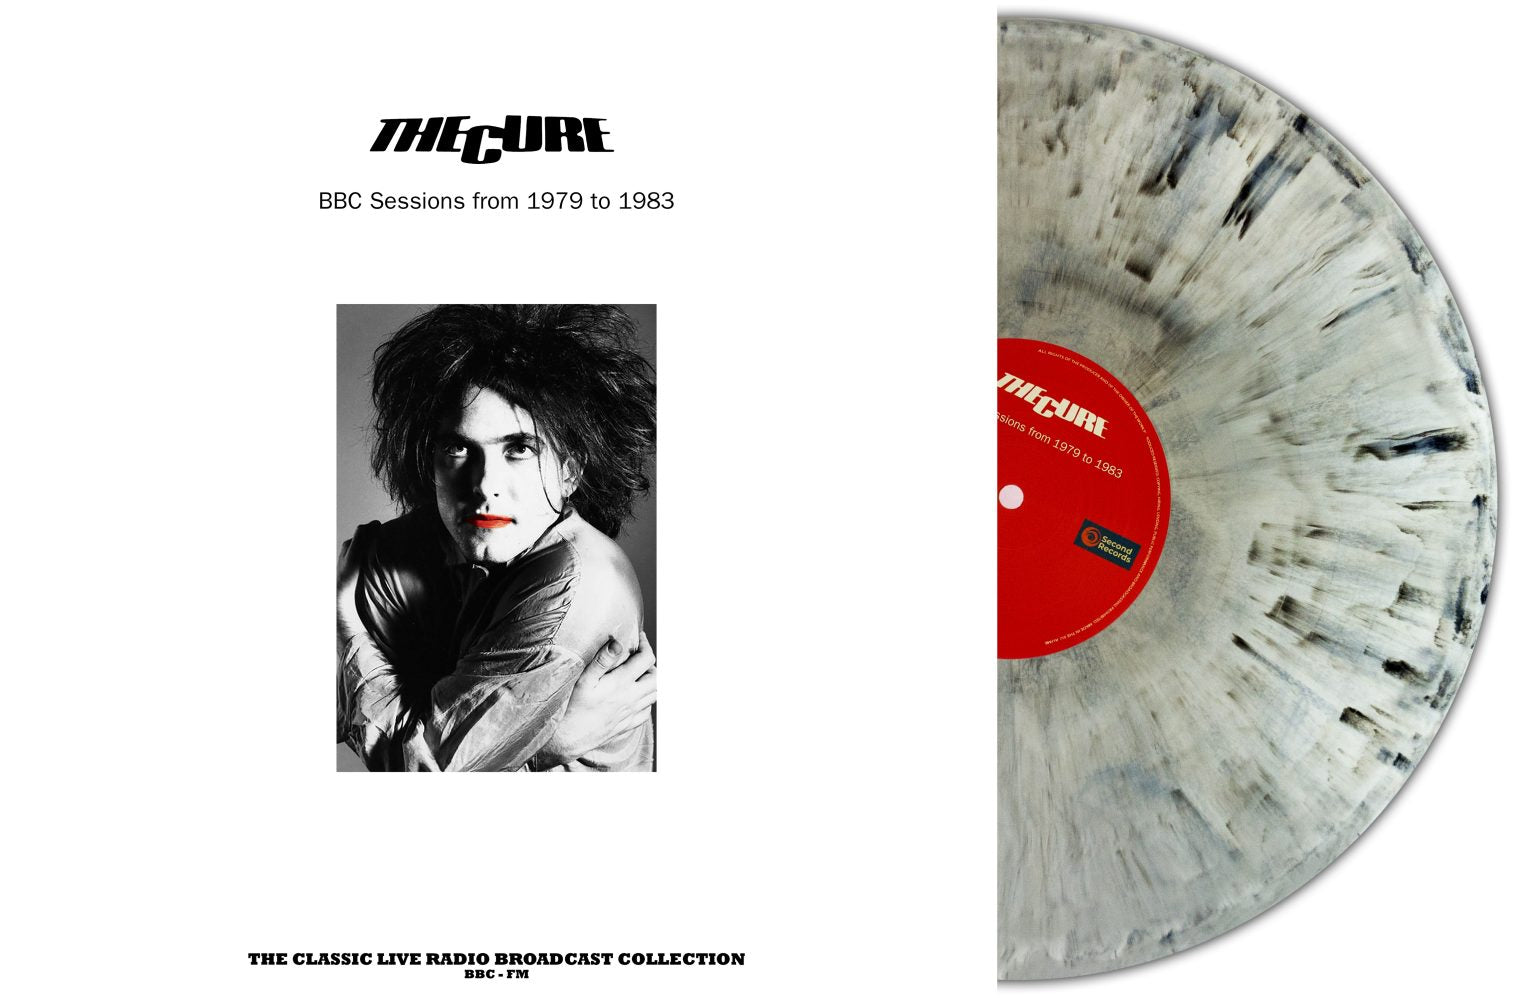 Limited! The cure vinyl - Horizons Music